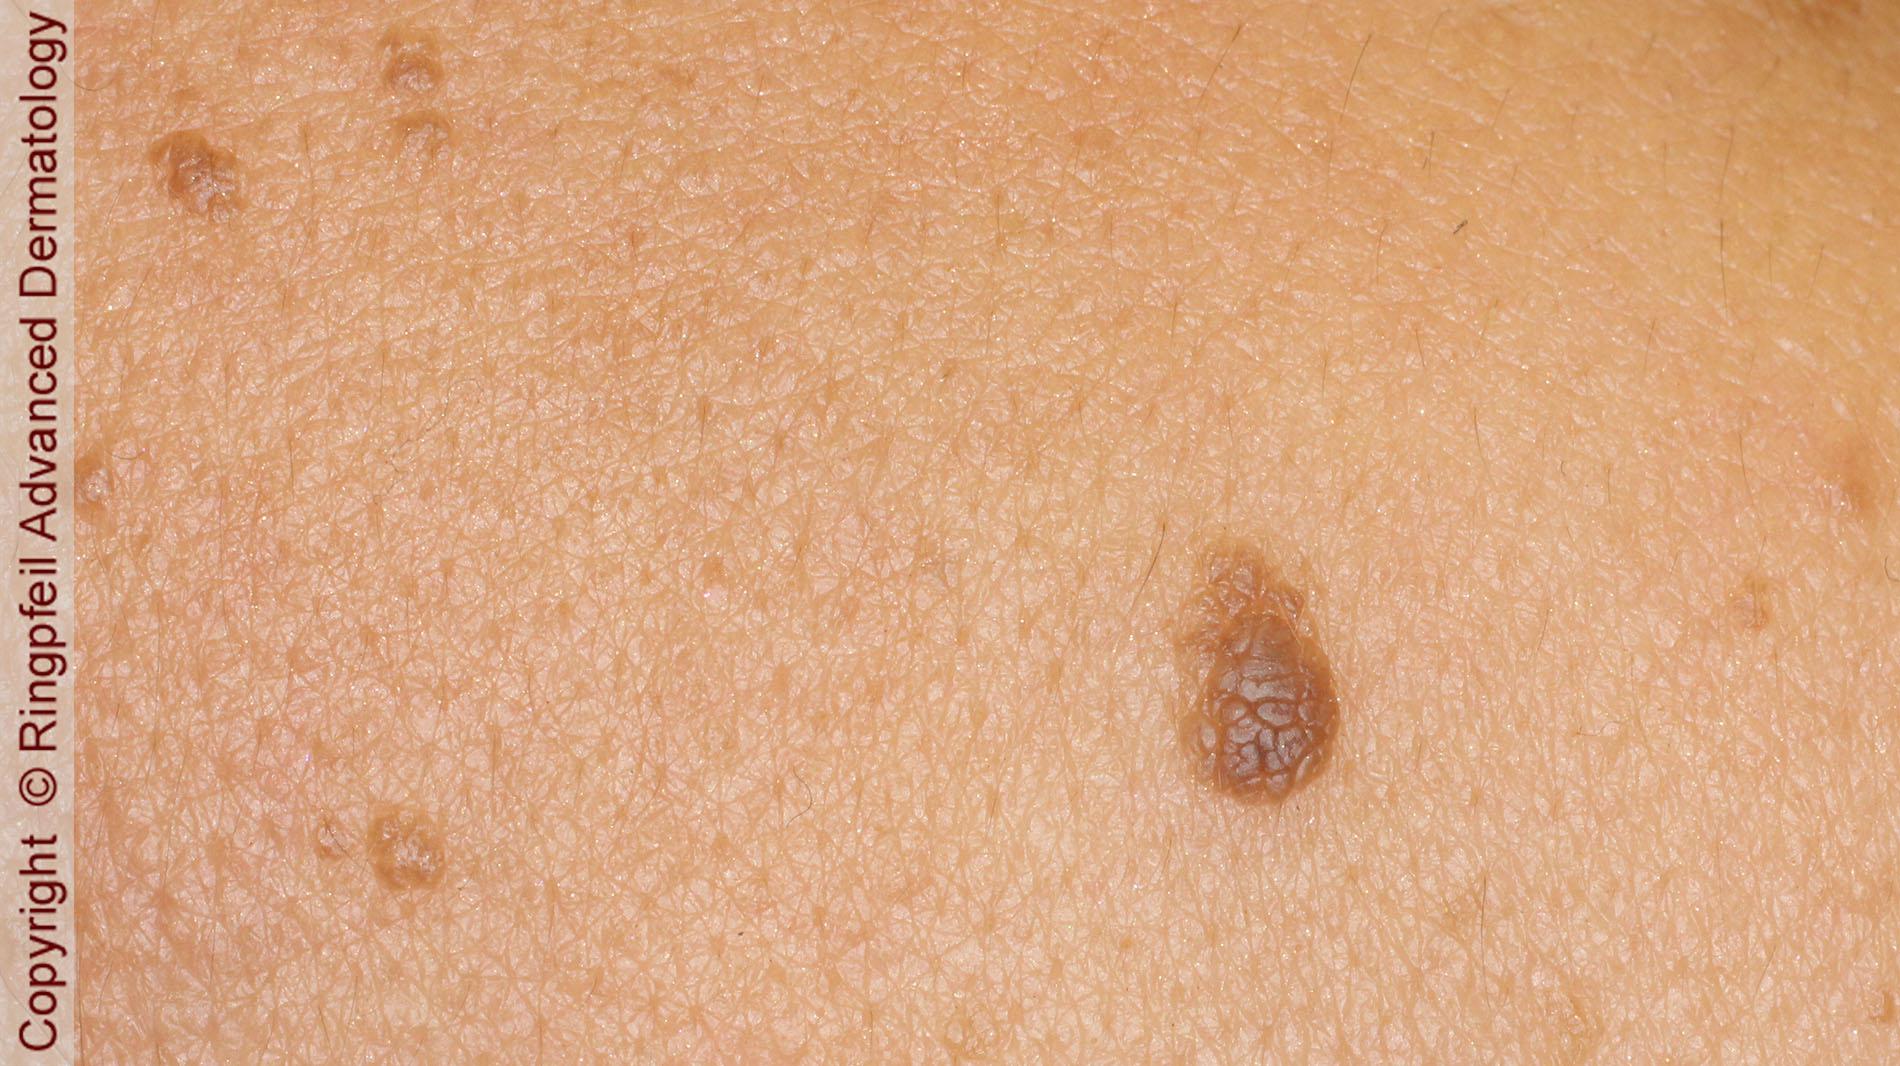 removal of atypical moles